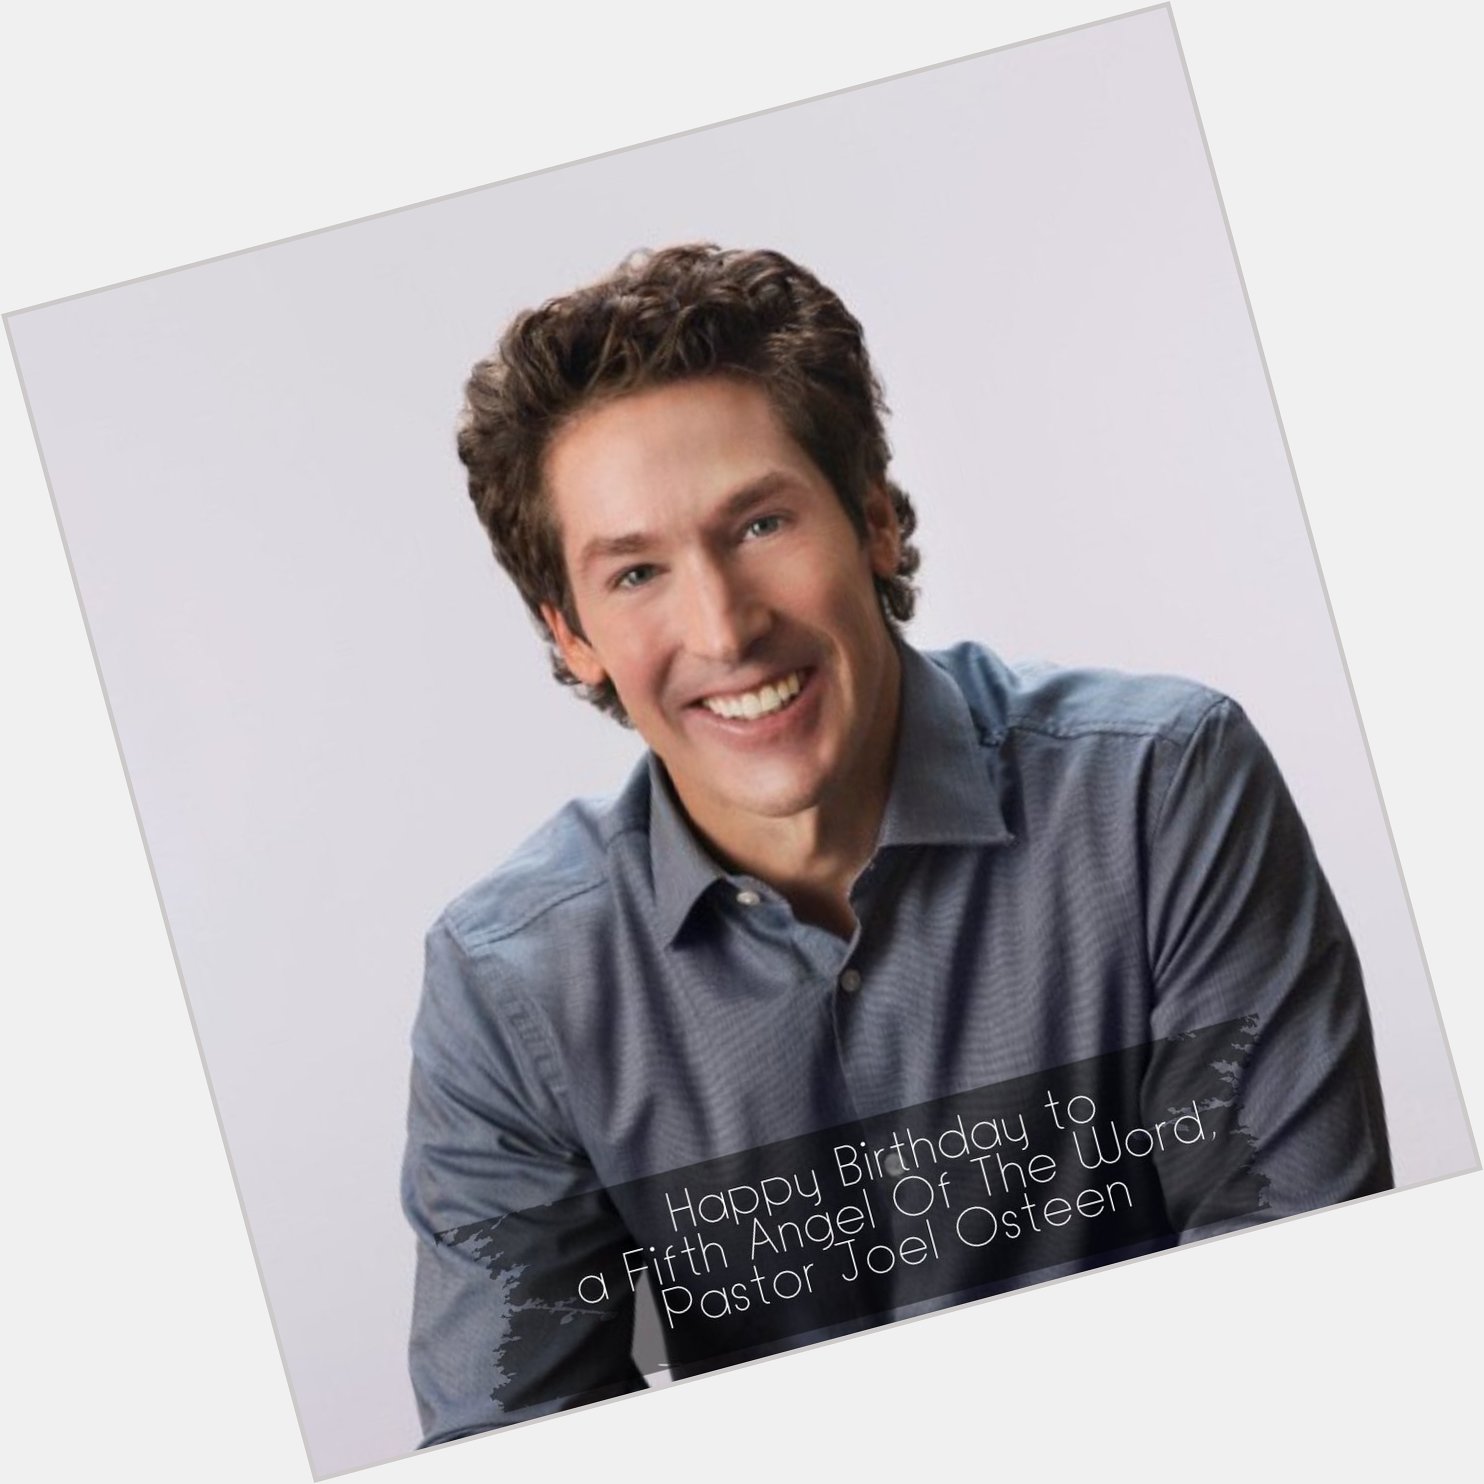 Happy Birthday to a Fifth Angel Of The Word, Pastor Joel Osteen 